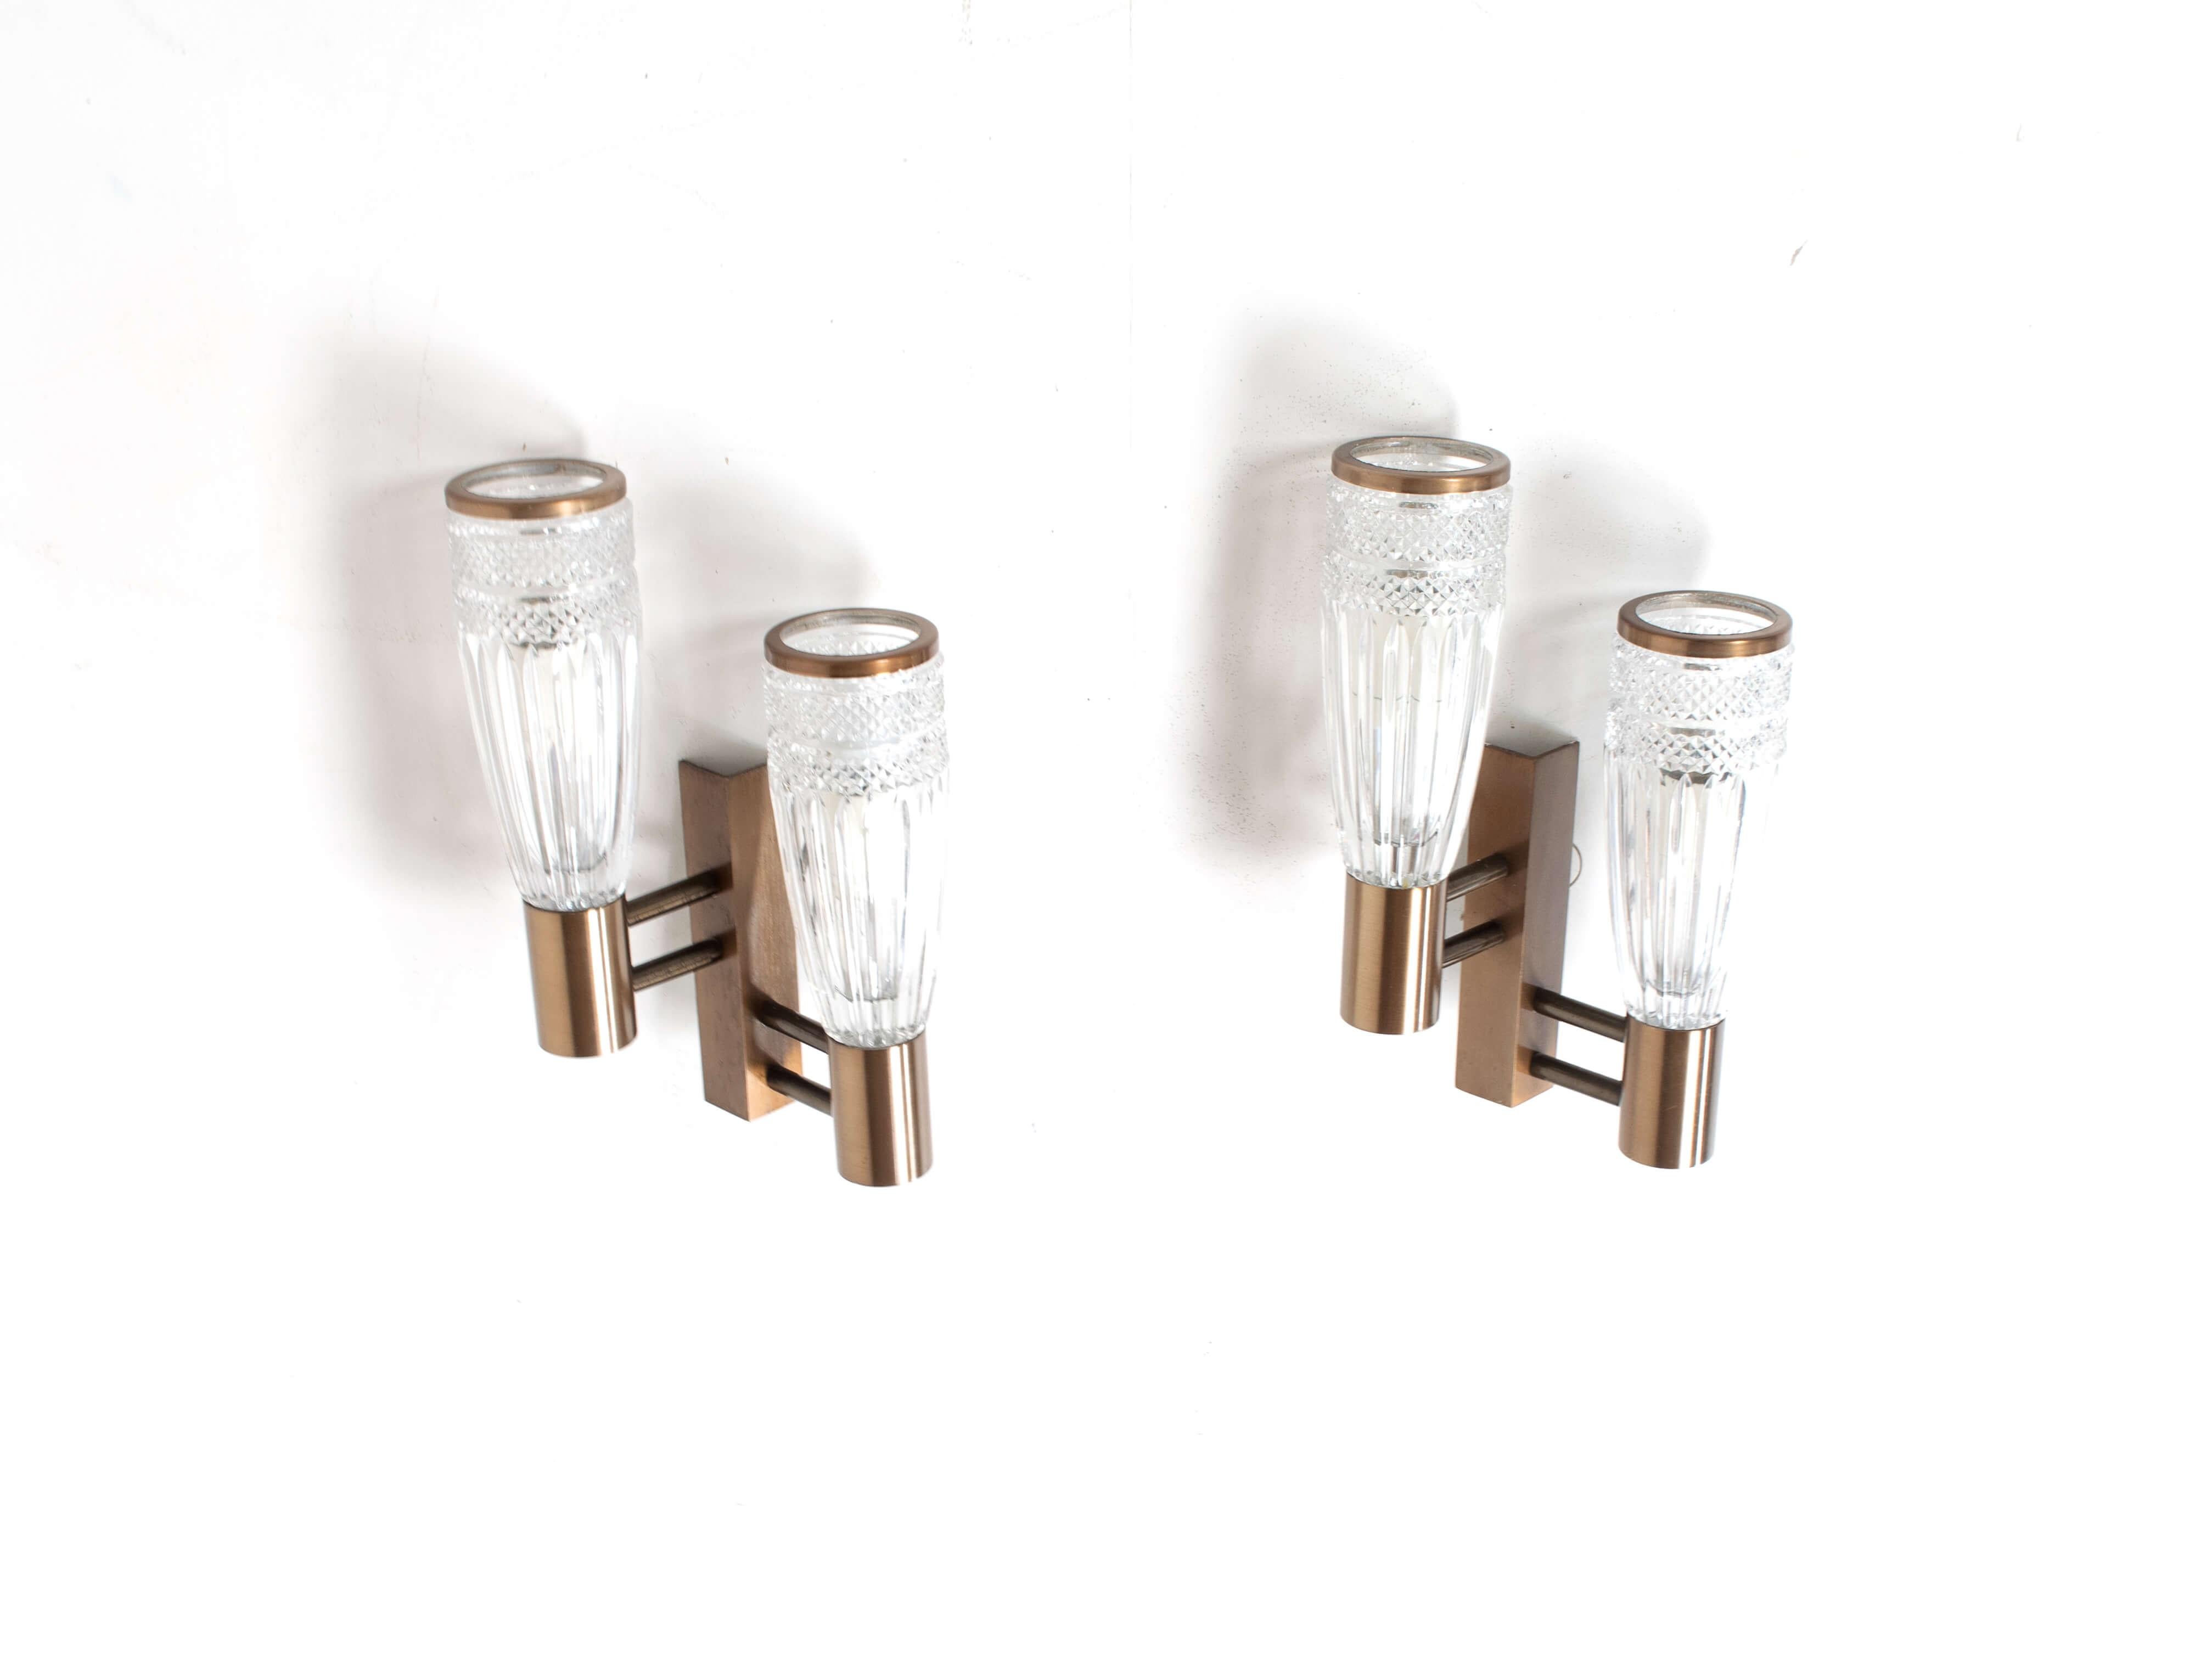 Set of three stilux wall appliques in glass, wood and metal from Italy, 1960s. These lights have an amazing design with a bronze colored base and crystal style glass. There are two items that have double lights and one that has a single light. The